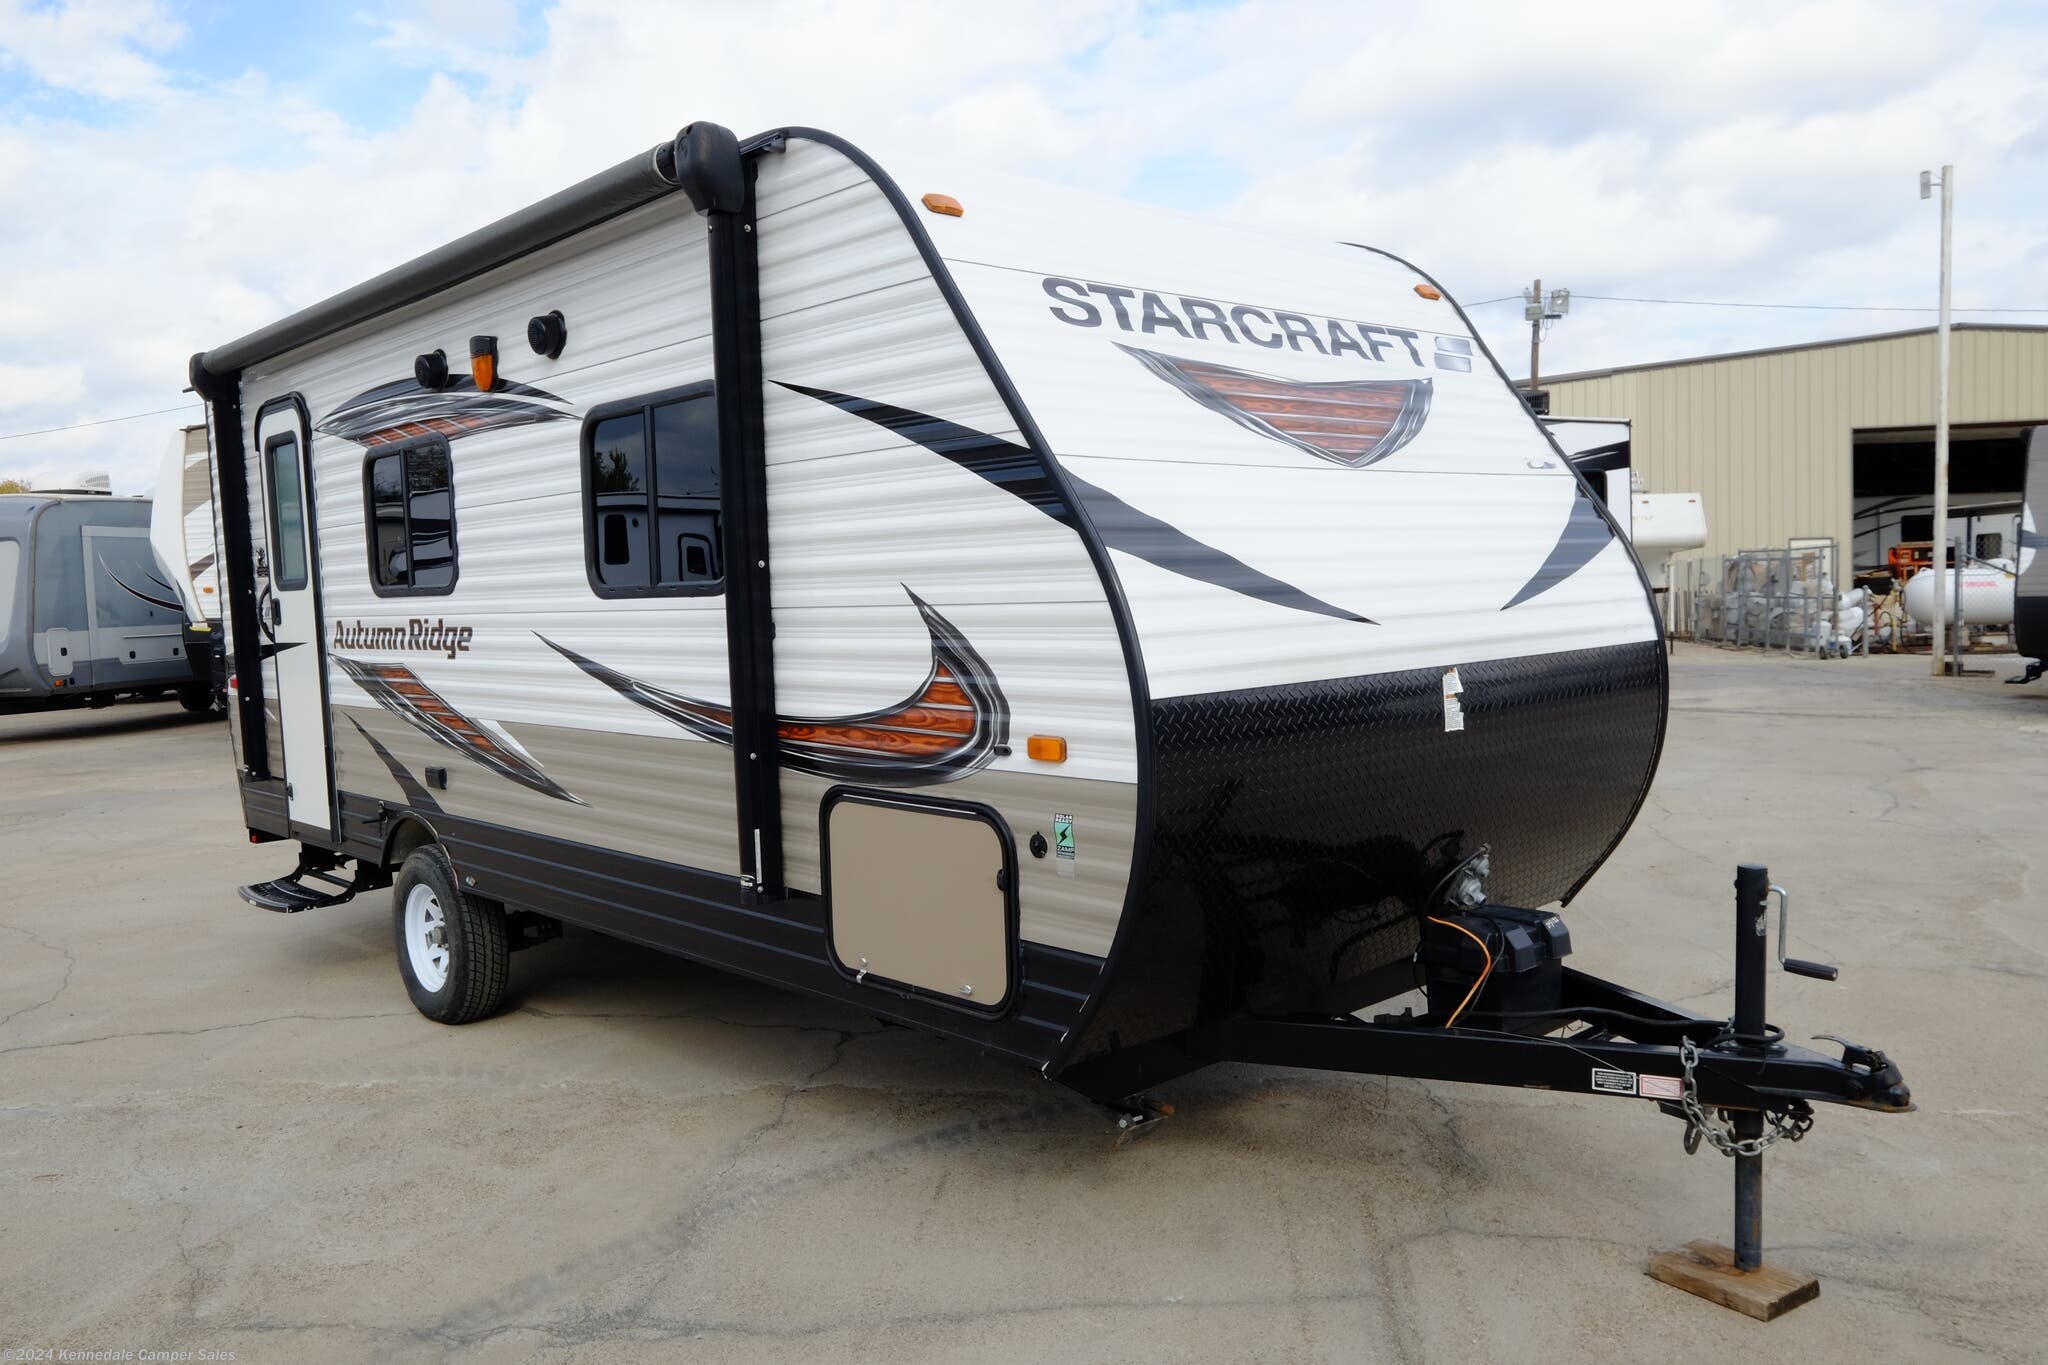 2018 Starcraft Autumn Ridge Outfitter 18QB RV for Sale in Kennedale, TX 76060 | ZP5132 | RVUSA 2018 Starcraft Autumn Ridge Outfitter 18qb Specs